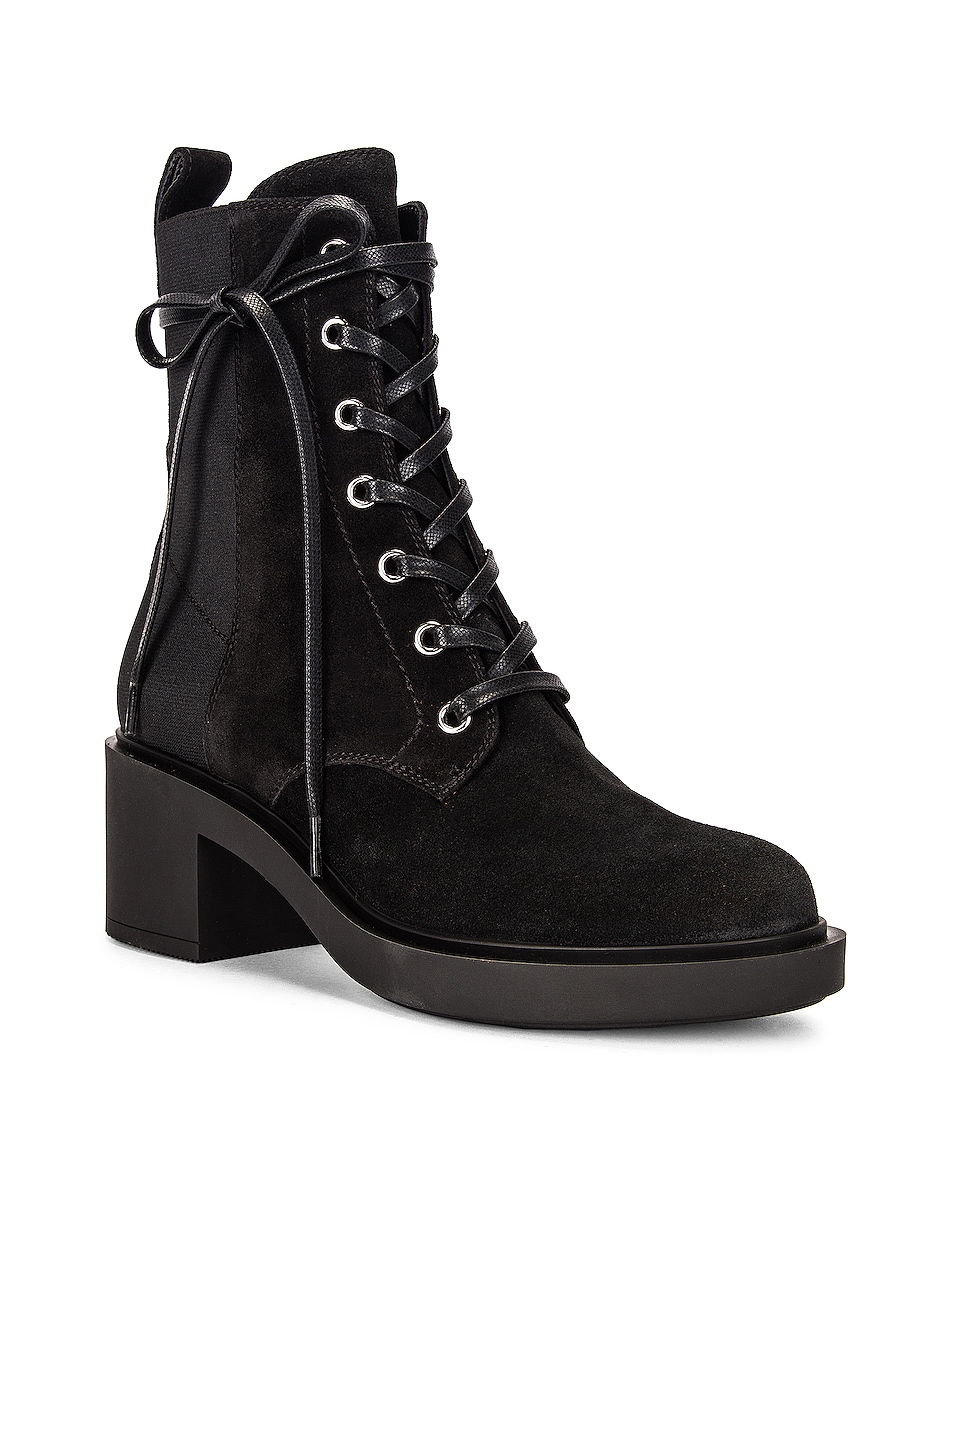 Gianvito Rossi Suede Lace Up Booties in Black & Black | FWRD